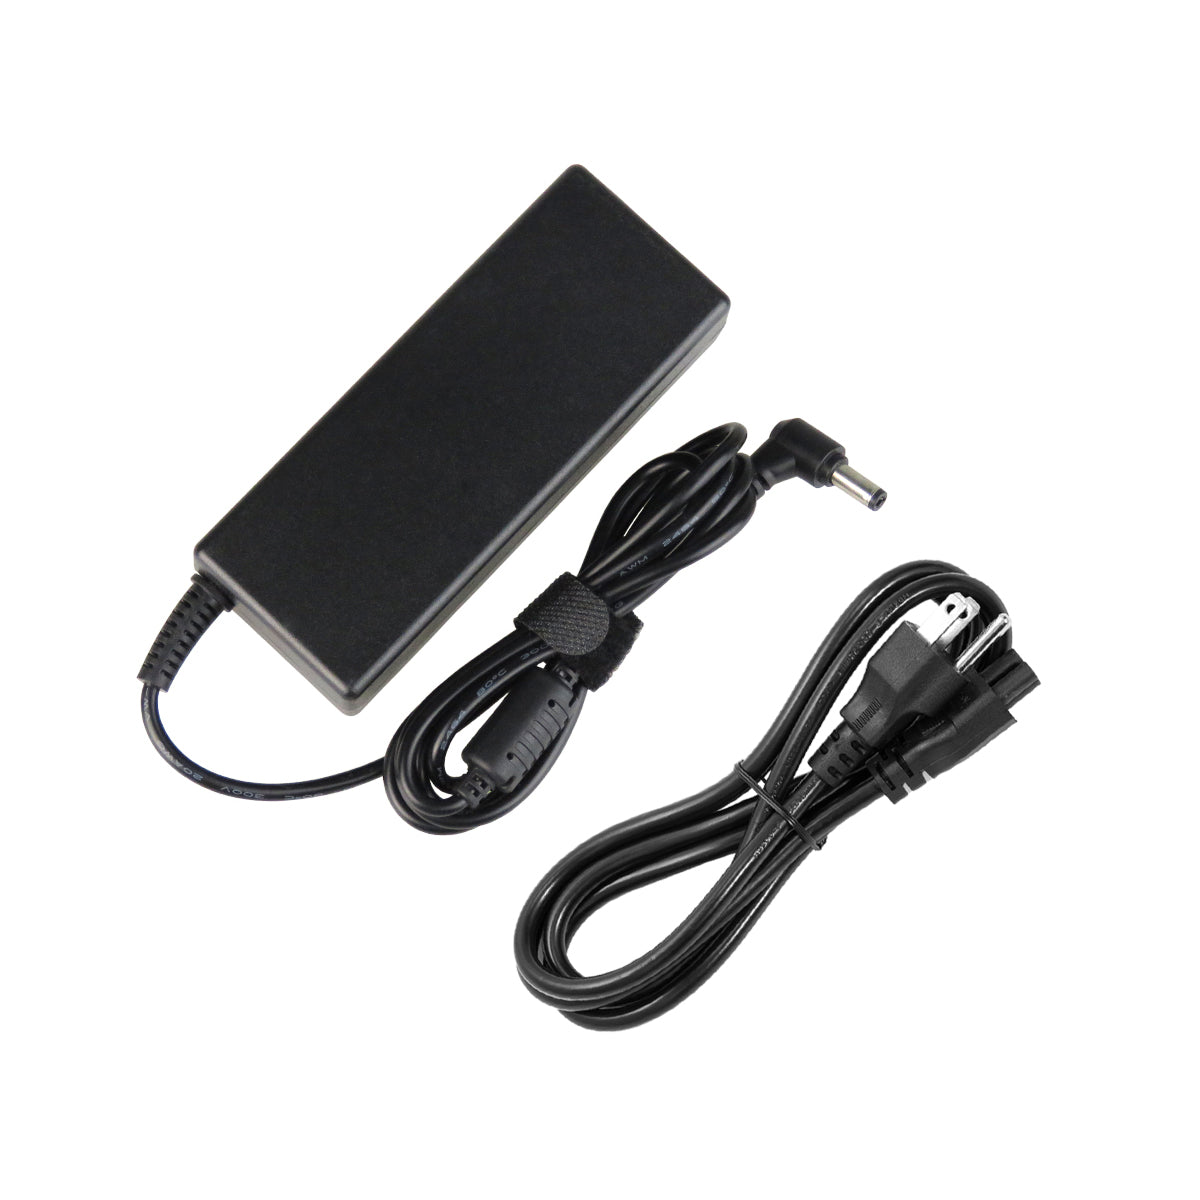 AC Adapter Charger for Gateway M-153 Notebook.